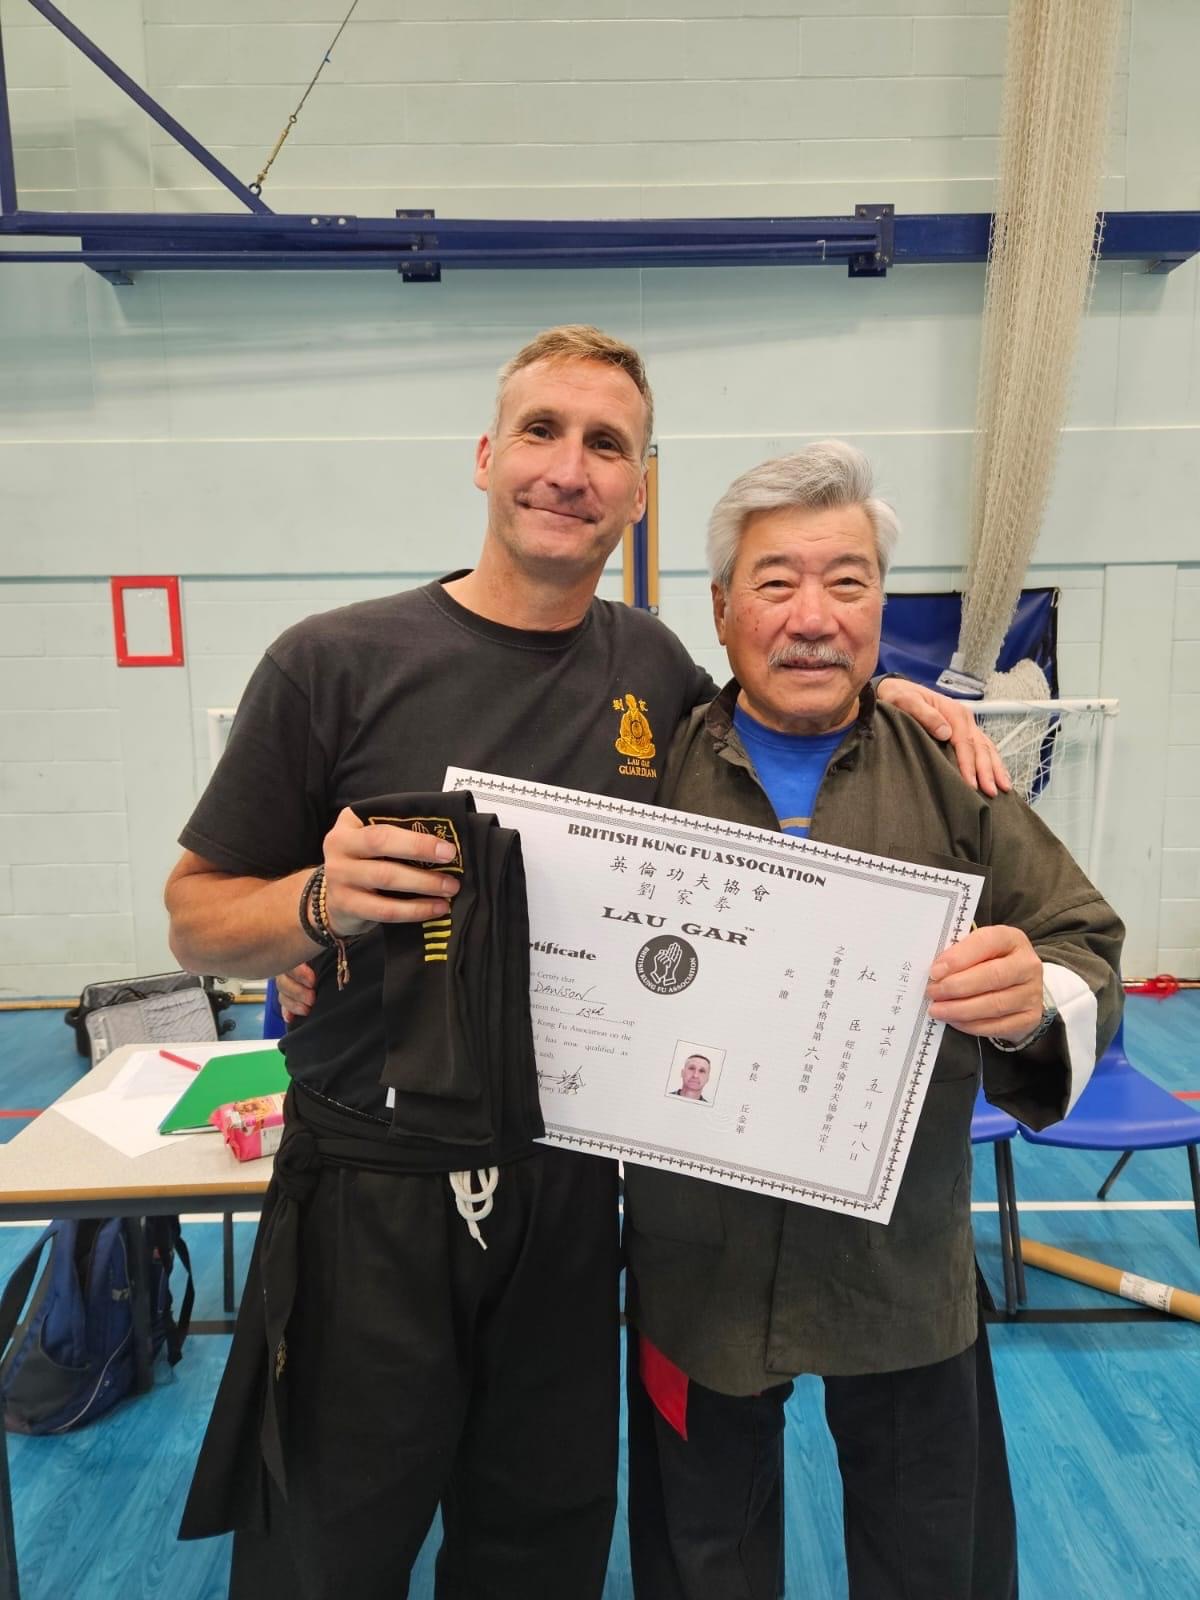 Our Sifu and Guardian Derek Dawson receiving his 6th Degree Black Sash and Certificate from Grand Master Yau.